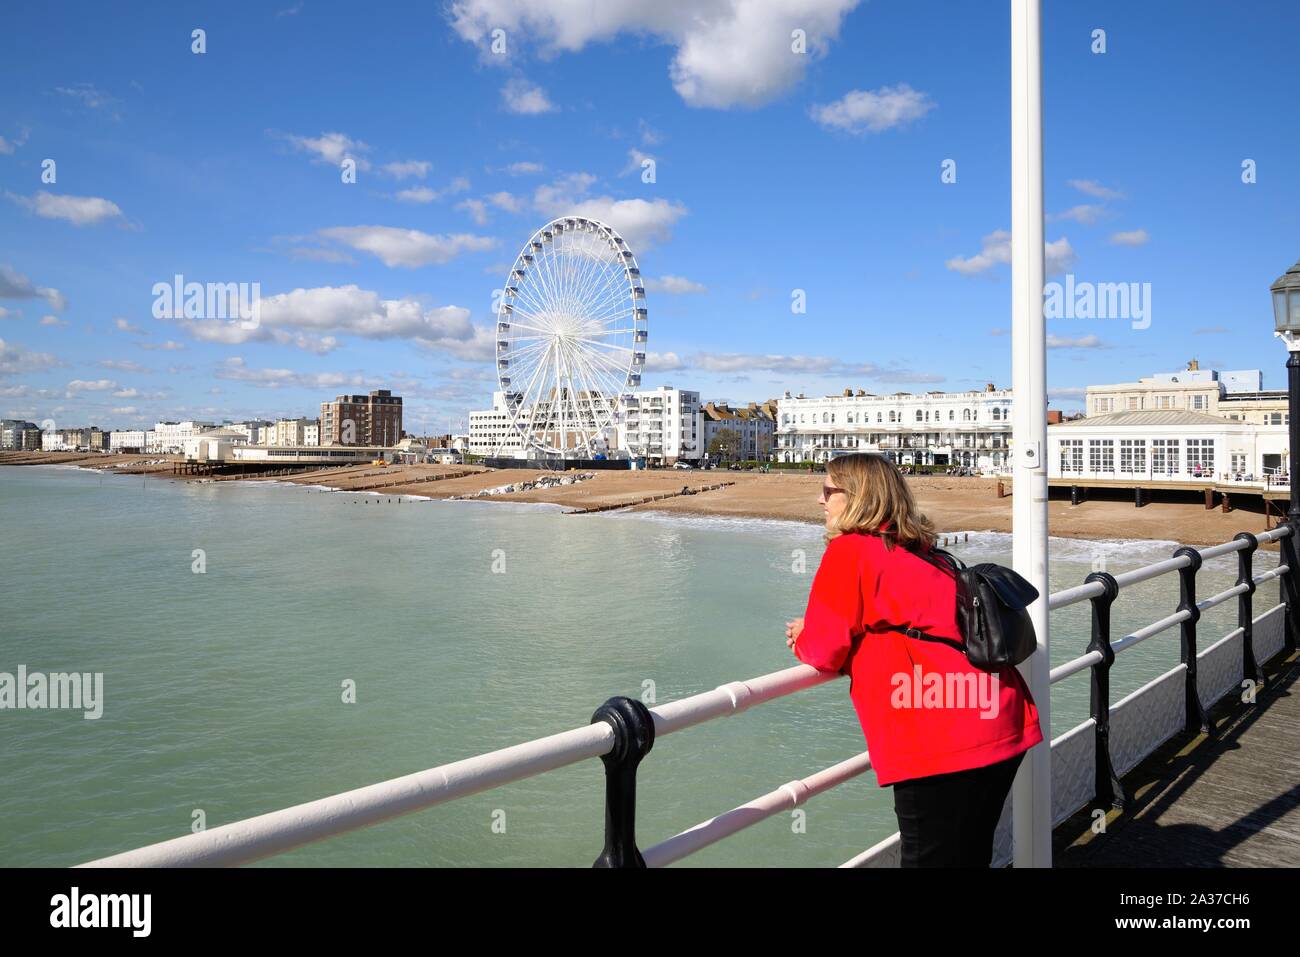 The Big Ferris Wheel on Worthing seafront as seen from the pier on a sunny summers day, West Sussex England UK Stock Photo